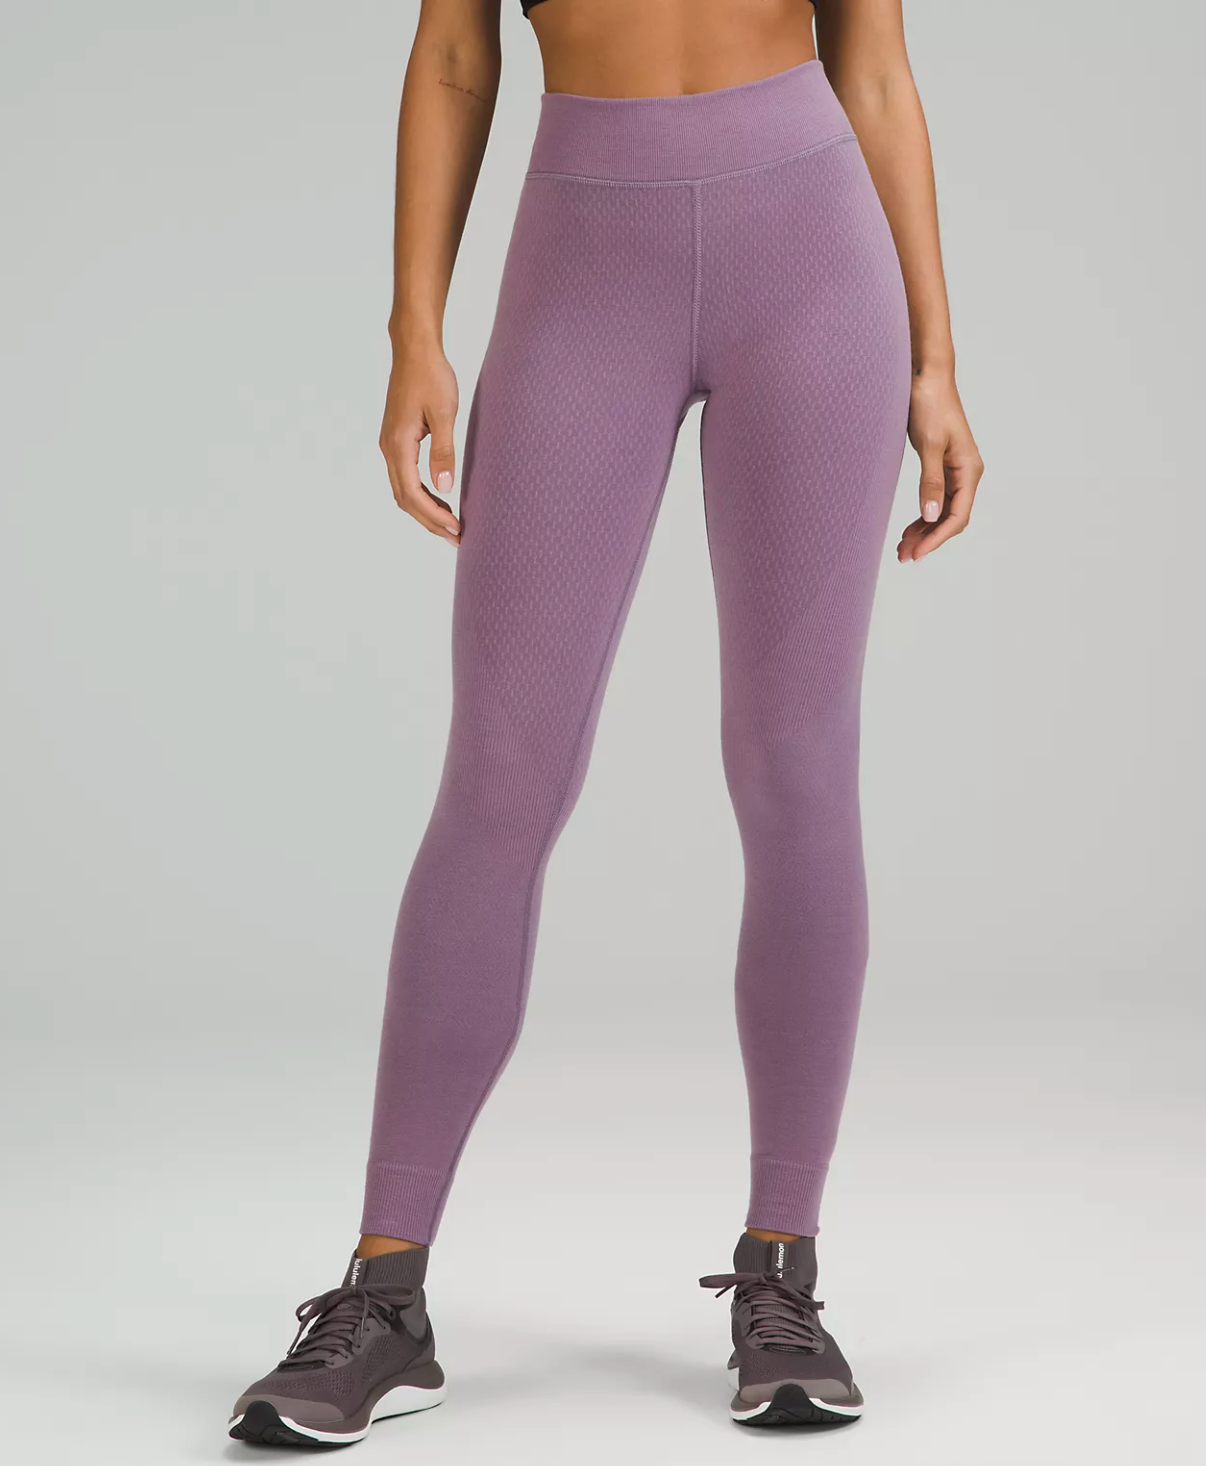 Can You Wear Thermals Under Leggings? – solowomen